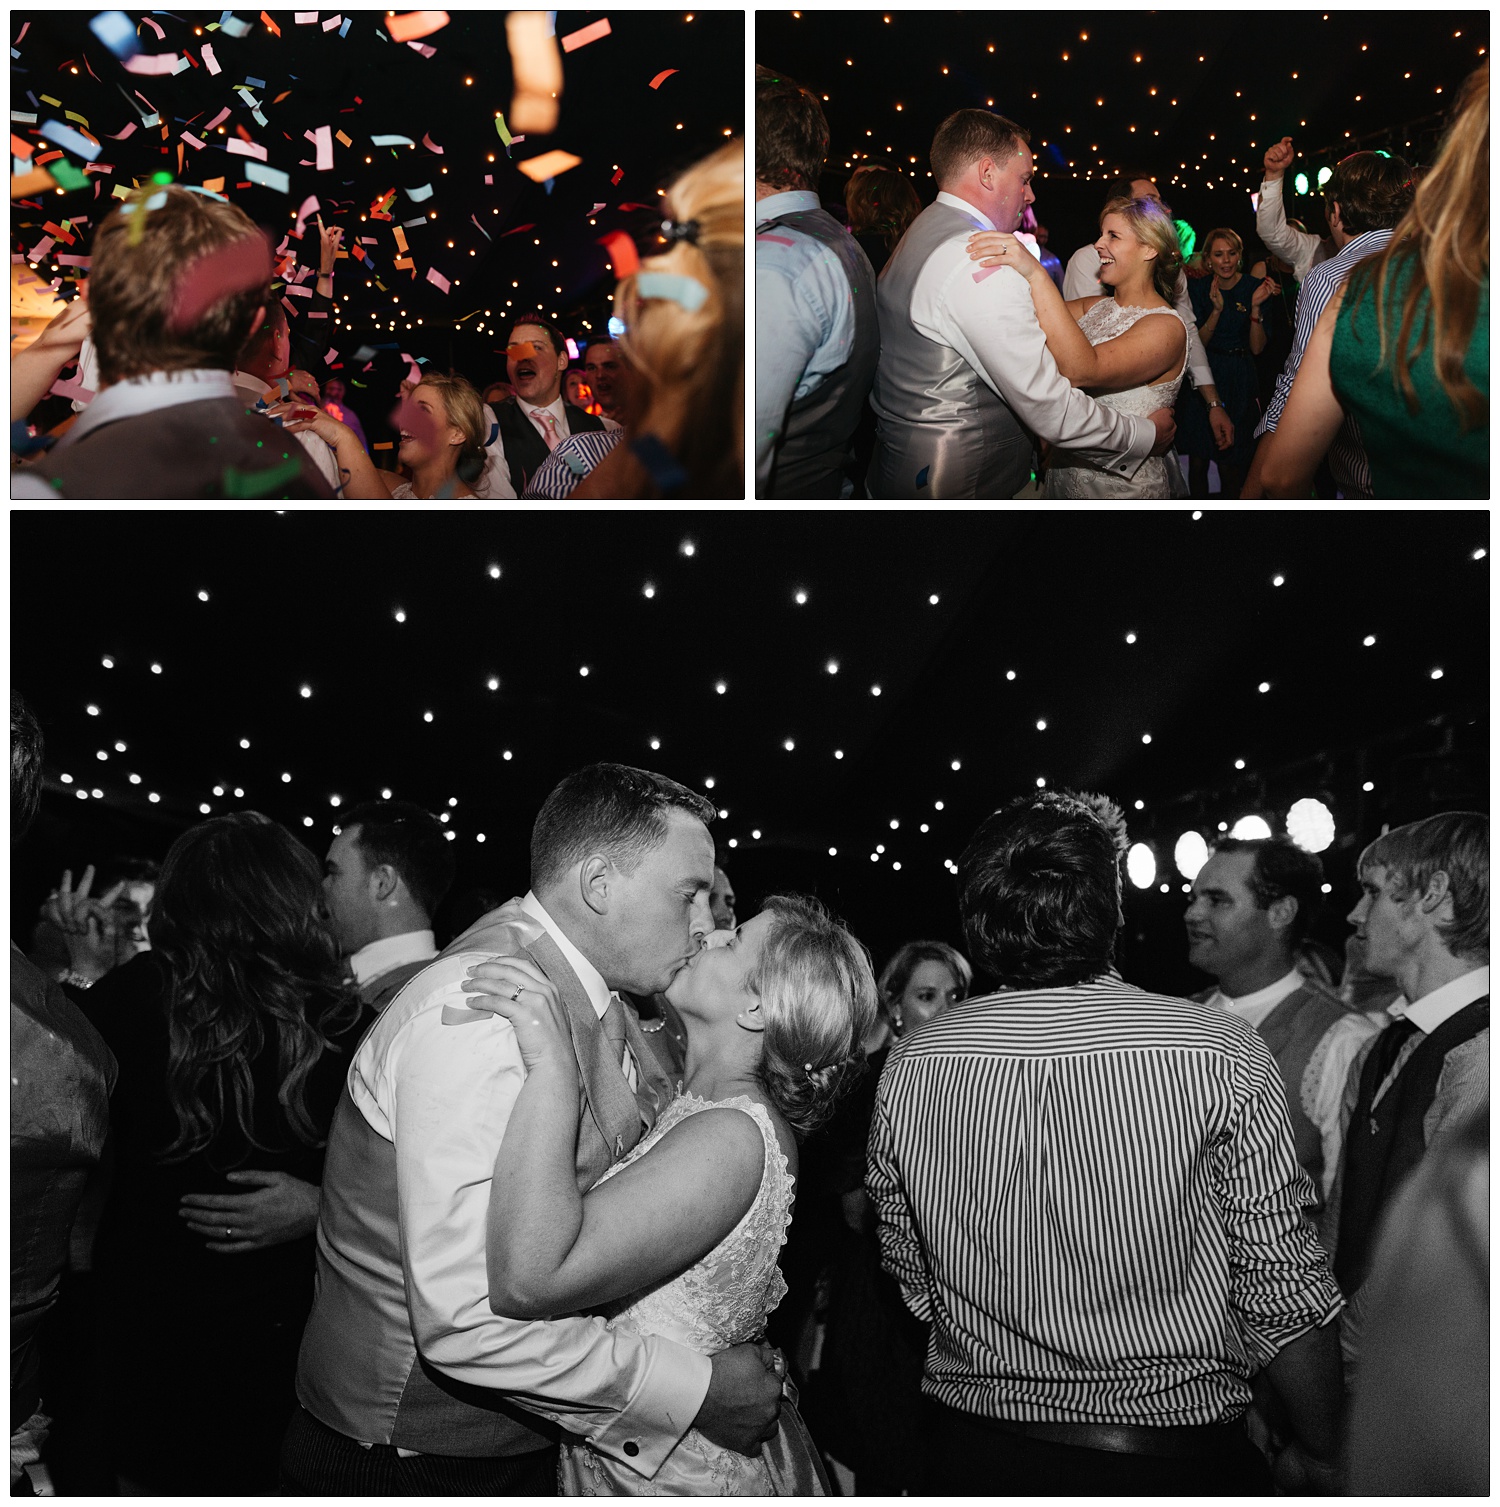 People dancing at a wedding reception. Confetti falling down, a black ceiling with small white lights.